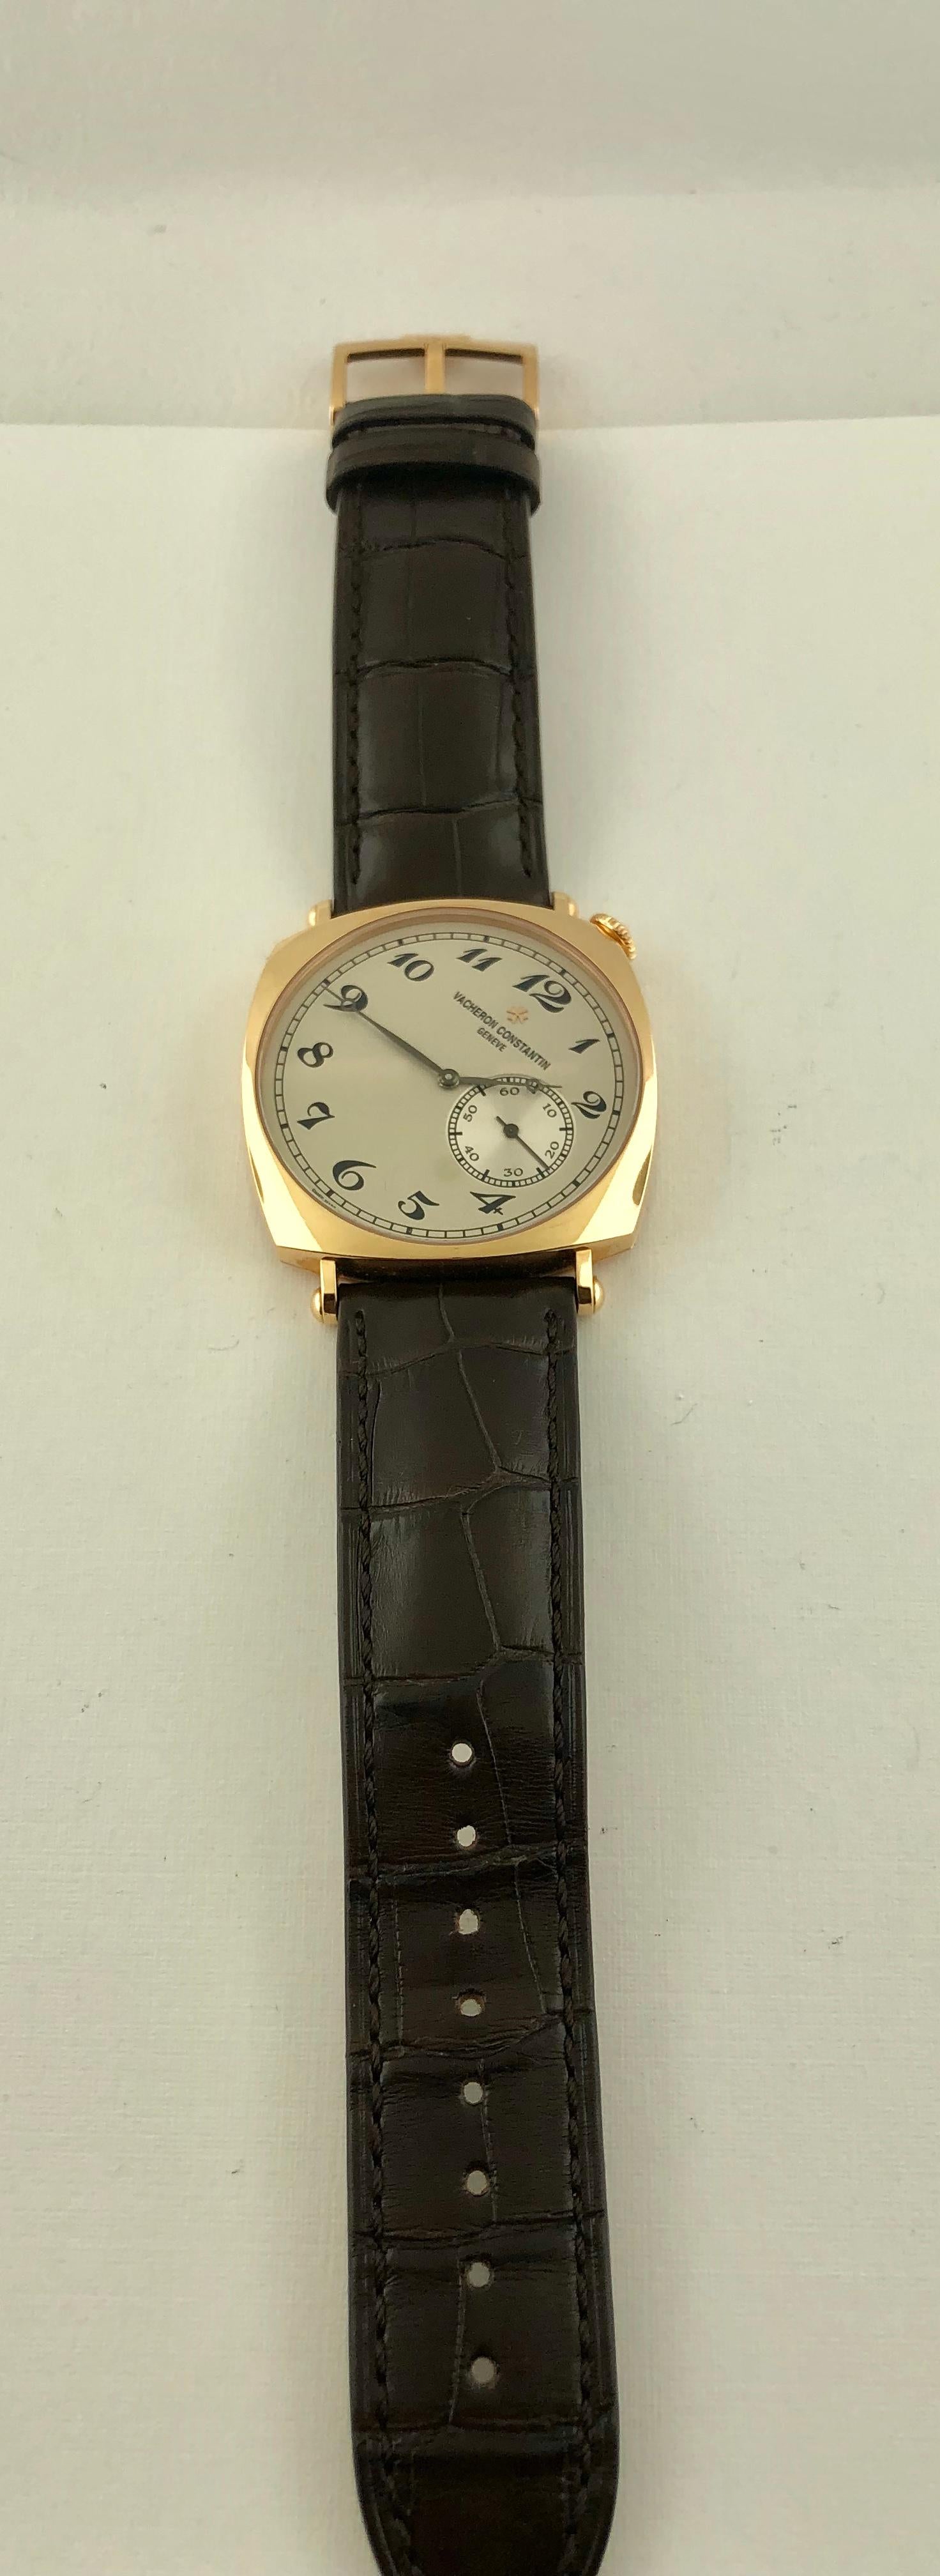 Vacheron Constantin Historiques American 1921 
 
18 karat Rose Gold 

Reference Number: 82035/000R-9359

Serial: 1241217

Movement: Manual winding

Retail Price: $35,700

No Box or Papers  

In Excellent Pre-Owned Condition 

124 Years In Business